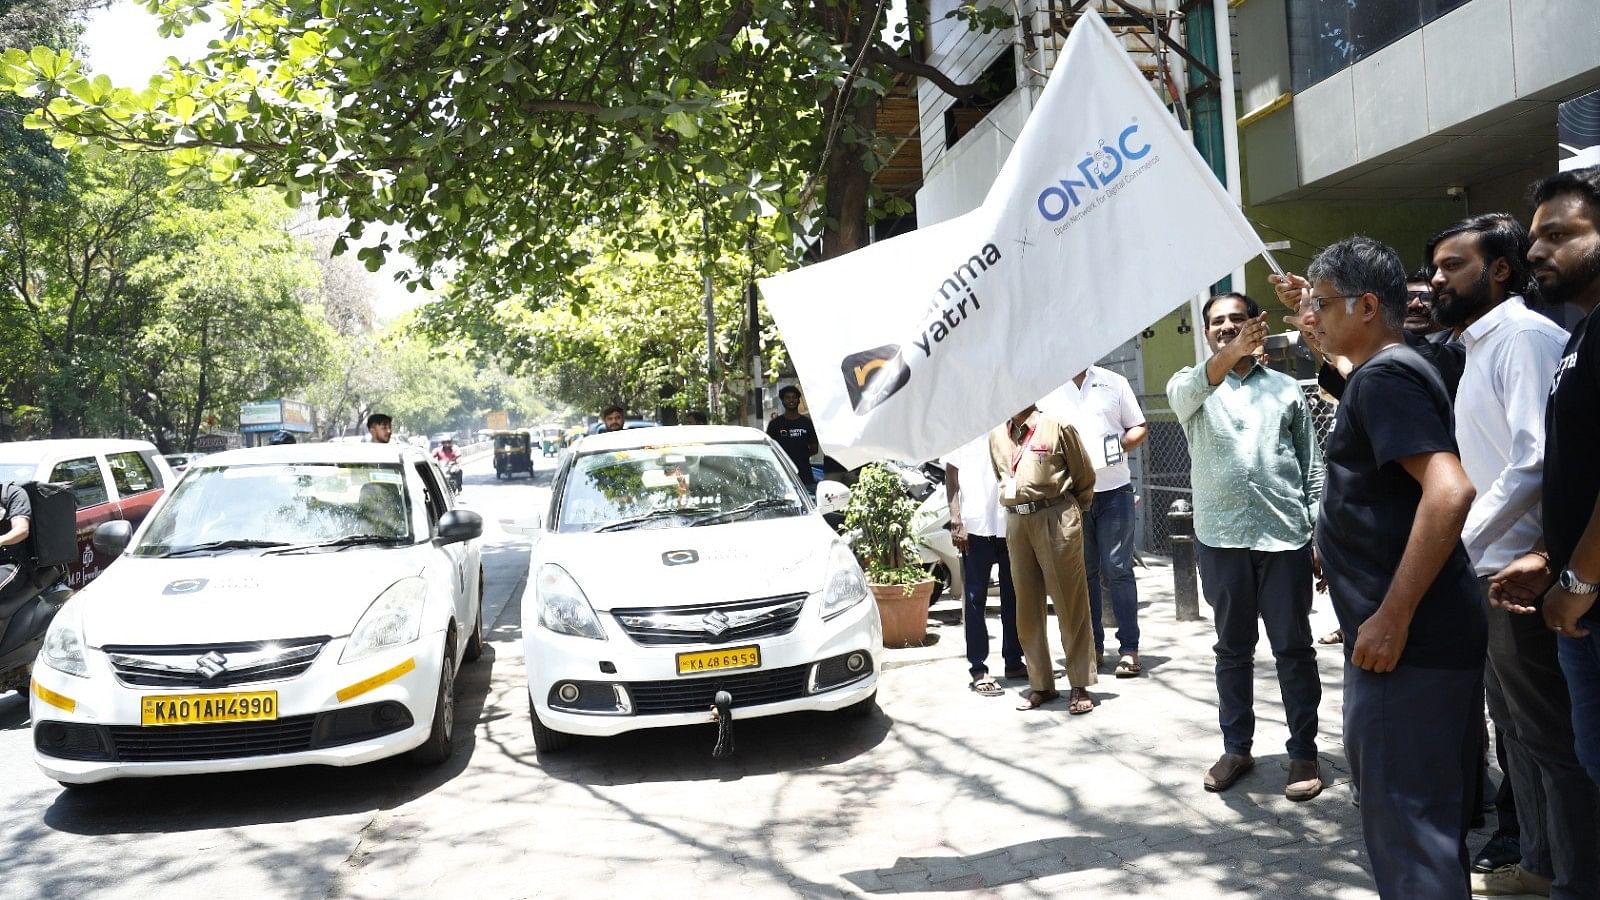 <div class="paragraphs"><p>Namma Yatri joins the likes of Uber, Ola and Rapido to launch cab services in Bengaluru. </p></div>